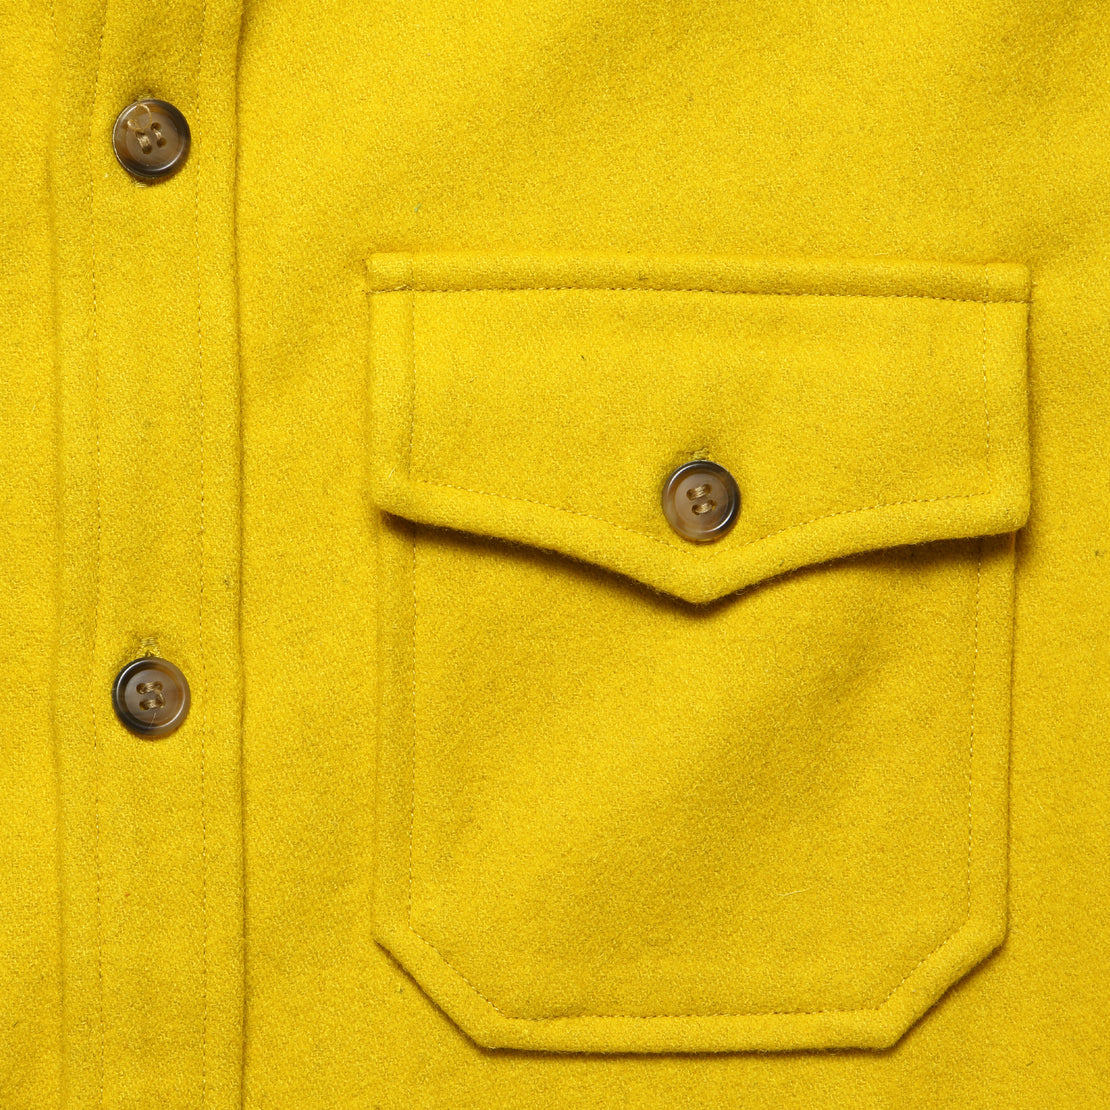 CPO Wool Shirt - Mustard - Schott - STAG Provisions - Tops - L/S Woven - Overshirt